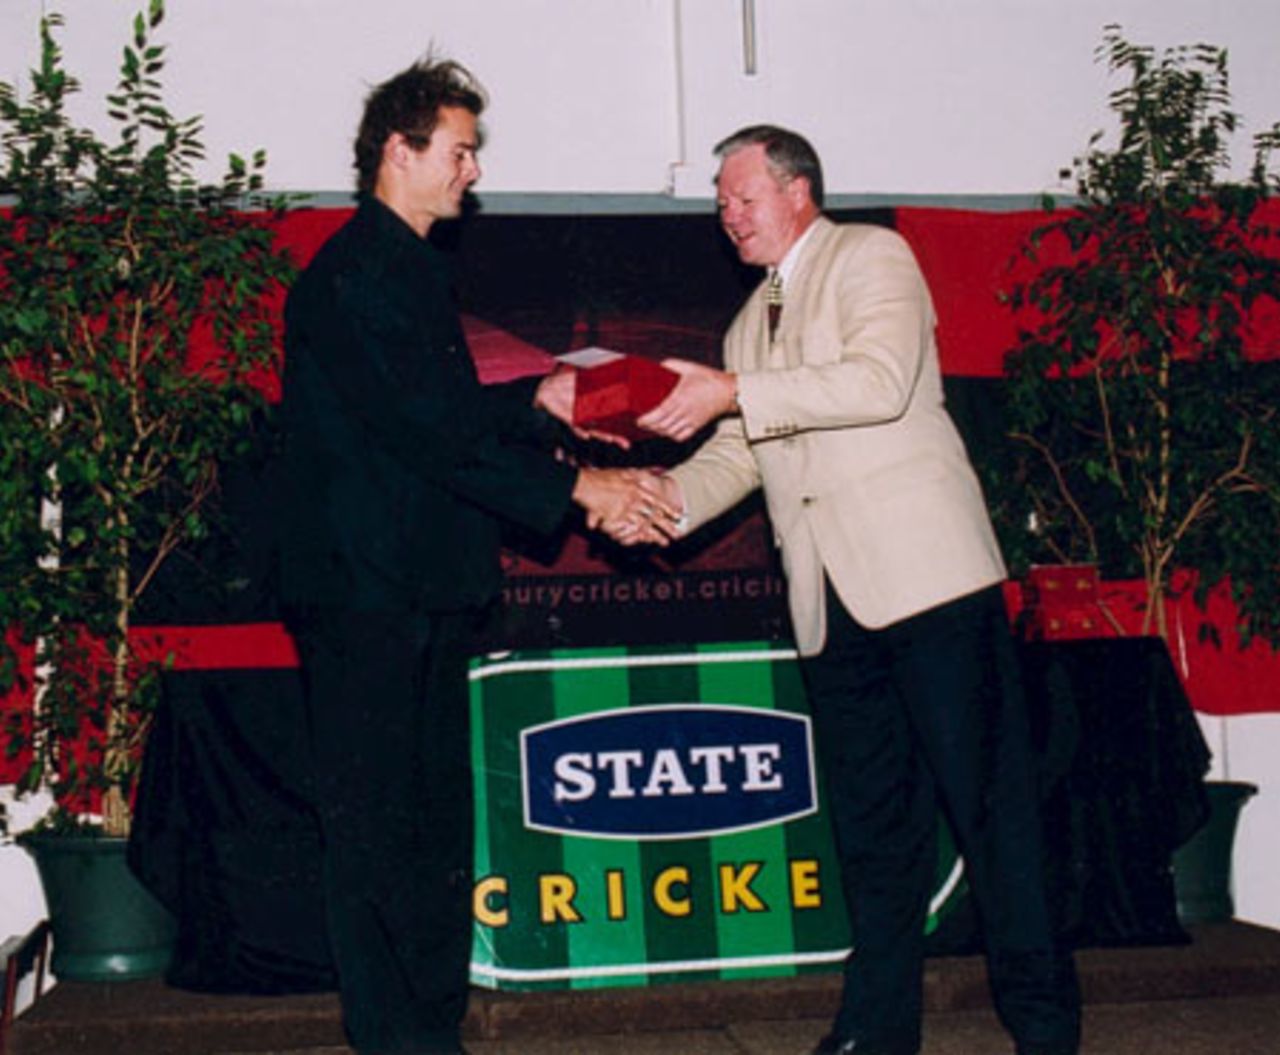 Chris Martin (left) receives the Holiday Inn State Canterbury Wizard Bowler of the Year award from Brian Tinworth of Holiday Inn. Canterbury Cricket Association Awards 2002/03 at the Canterbury Horticultural Society Hall at Christchurch, 10 April 2003.